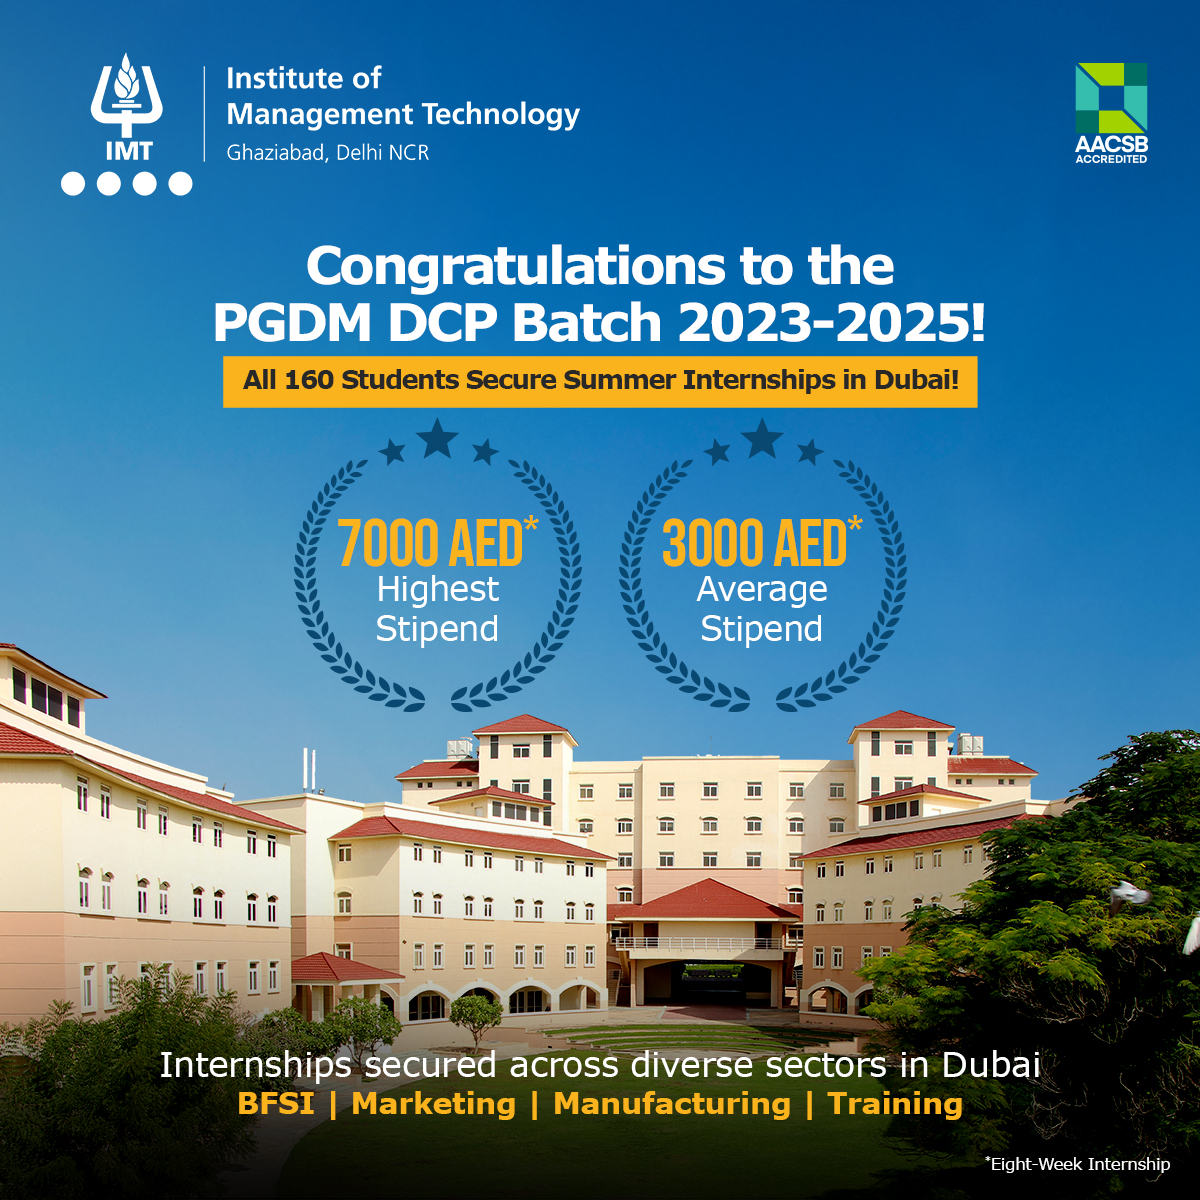 🎉 Huge congratulations to the PGDM DCP Batch 2023-2025! 🎉

All 160 students have secured prestigious summer internships in Dubai! 🌟

🏆 Highest Stipend: 7000 AED* (approx. INR1,50,000)
💰 Average Stipend: 3000 AED* (approx. INR 65,000)